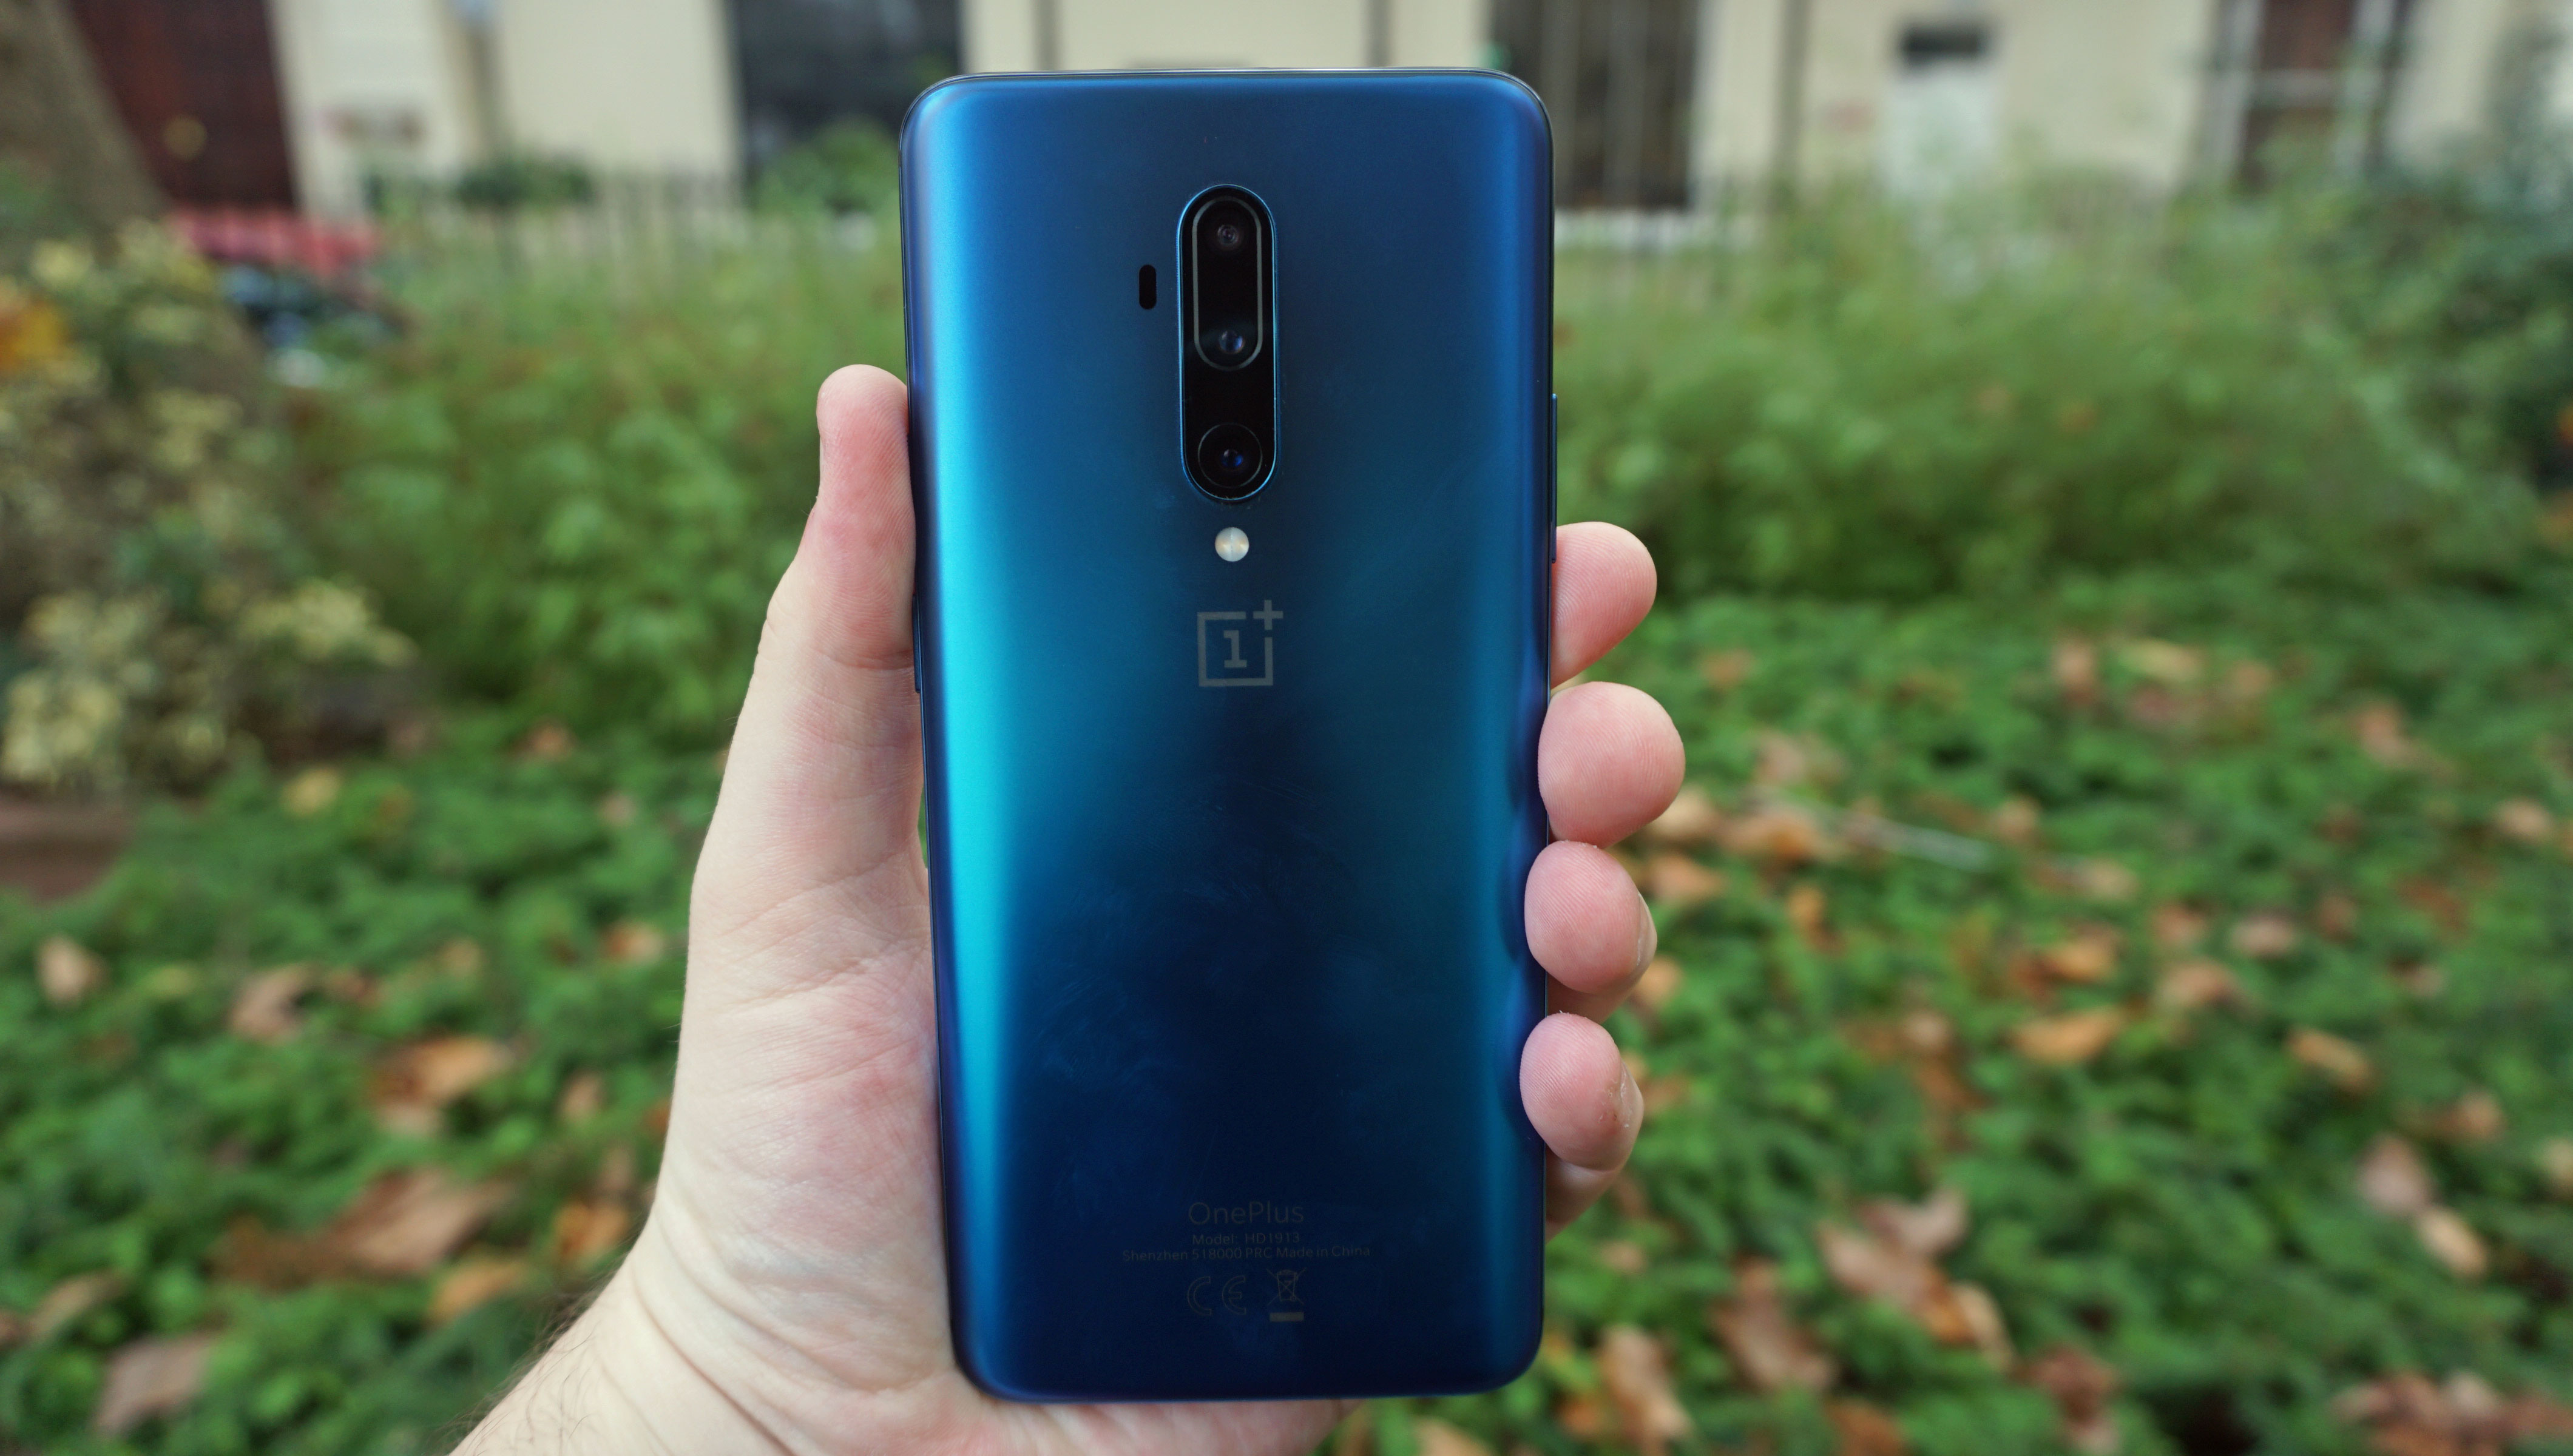 Oneplus 7t Pro With Mclaren Edition Launched In India Starting At